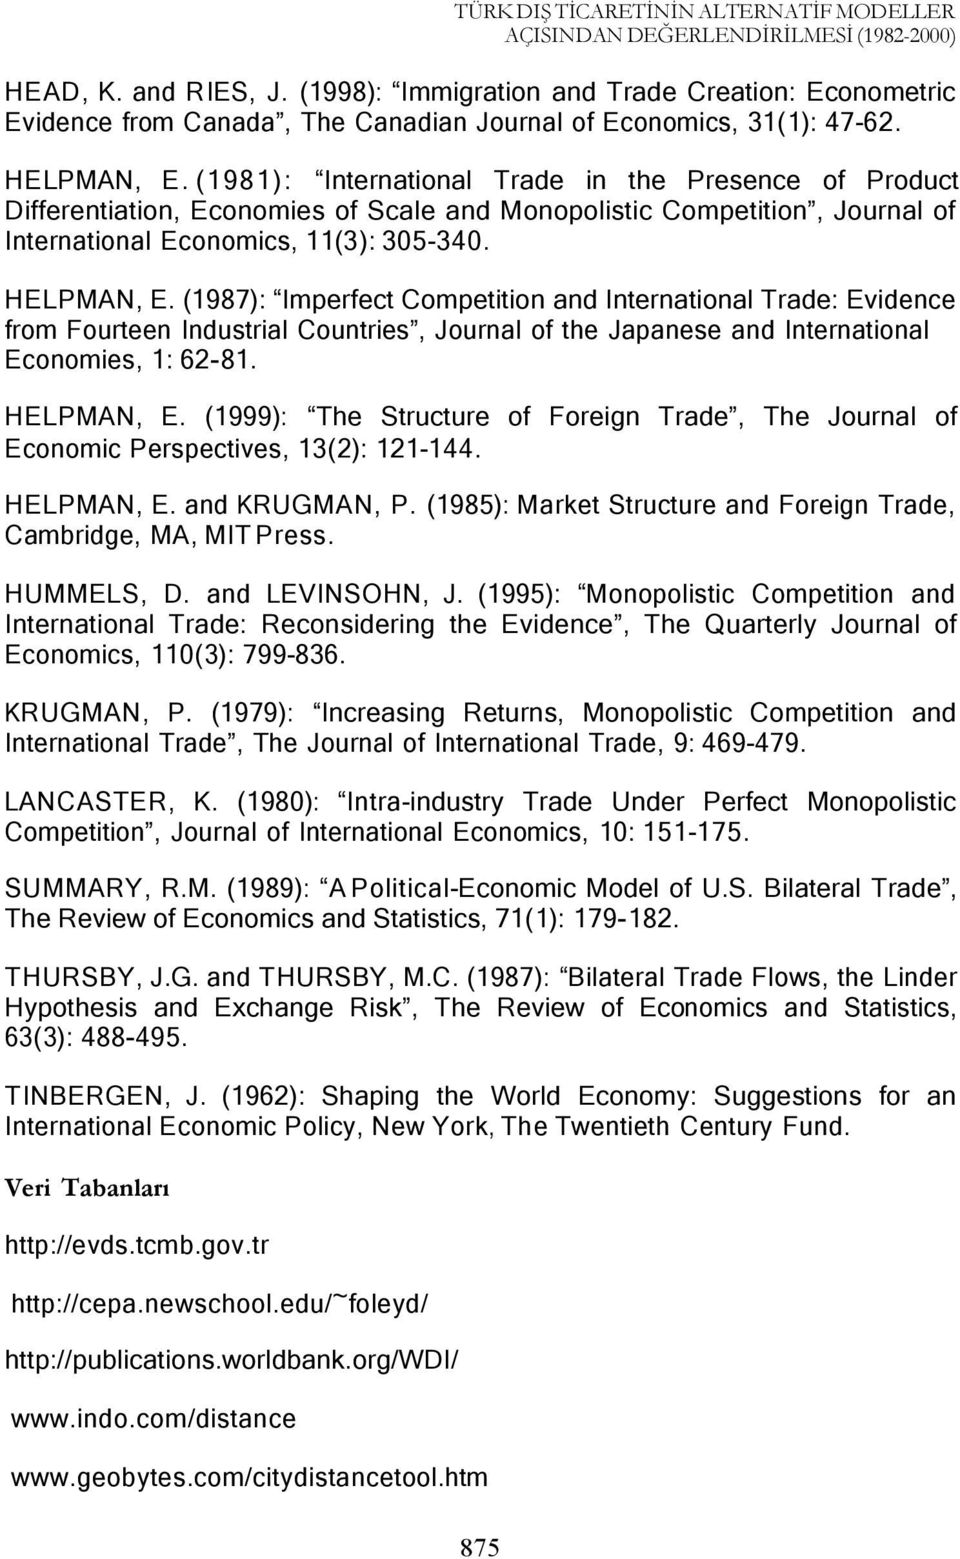 (1987): Imperfect Competition and International Trade: Evidence from Fourteen Industrial Countries, Journal of the Japanese and International Economies, 1: 6-81. HELPMAN, E.